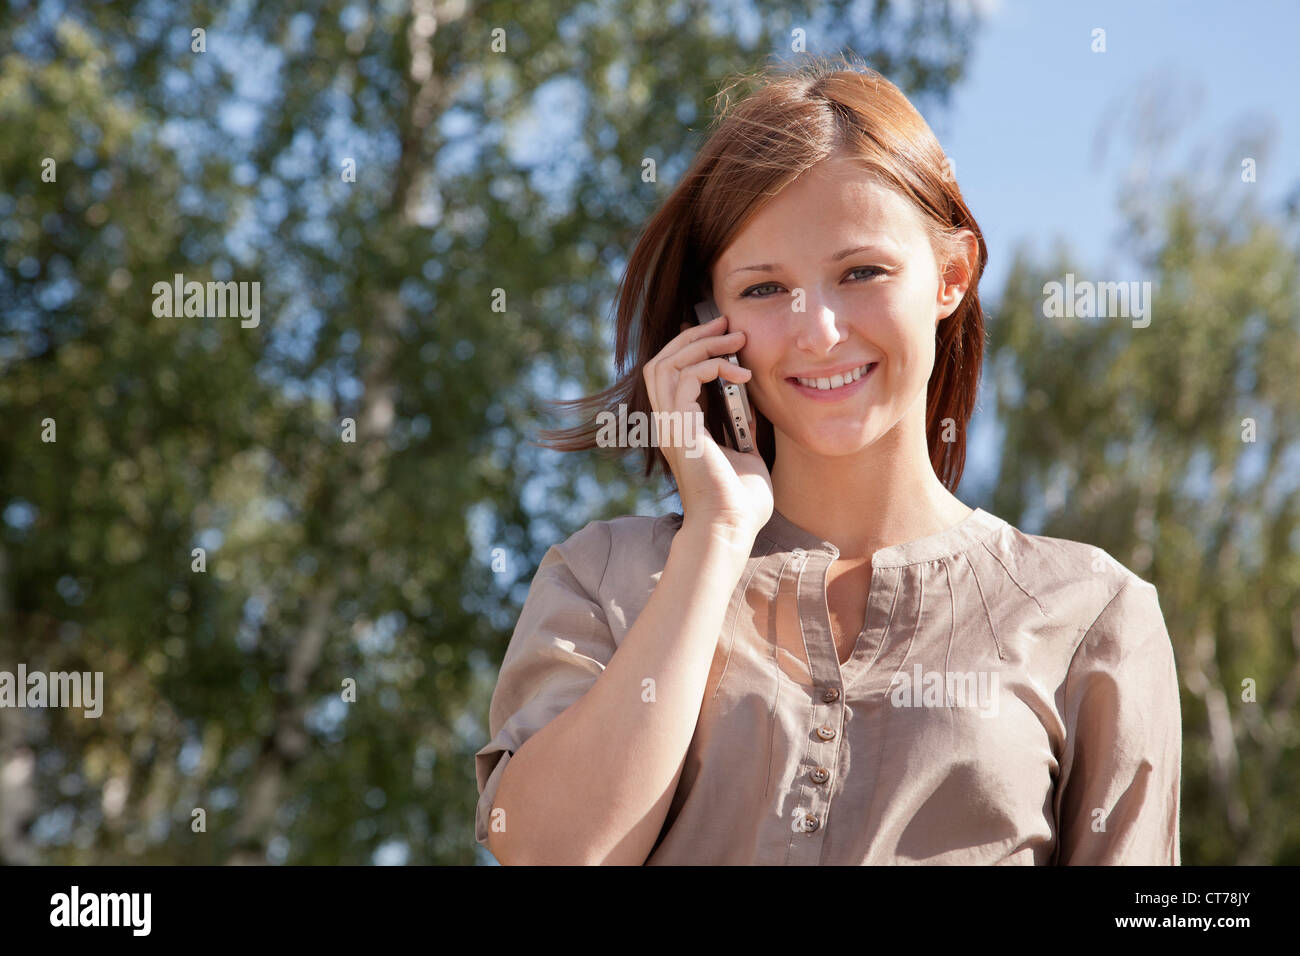 Portrait of young woman talking on mobile phone Banque D'Images